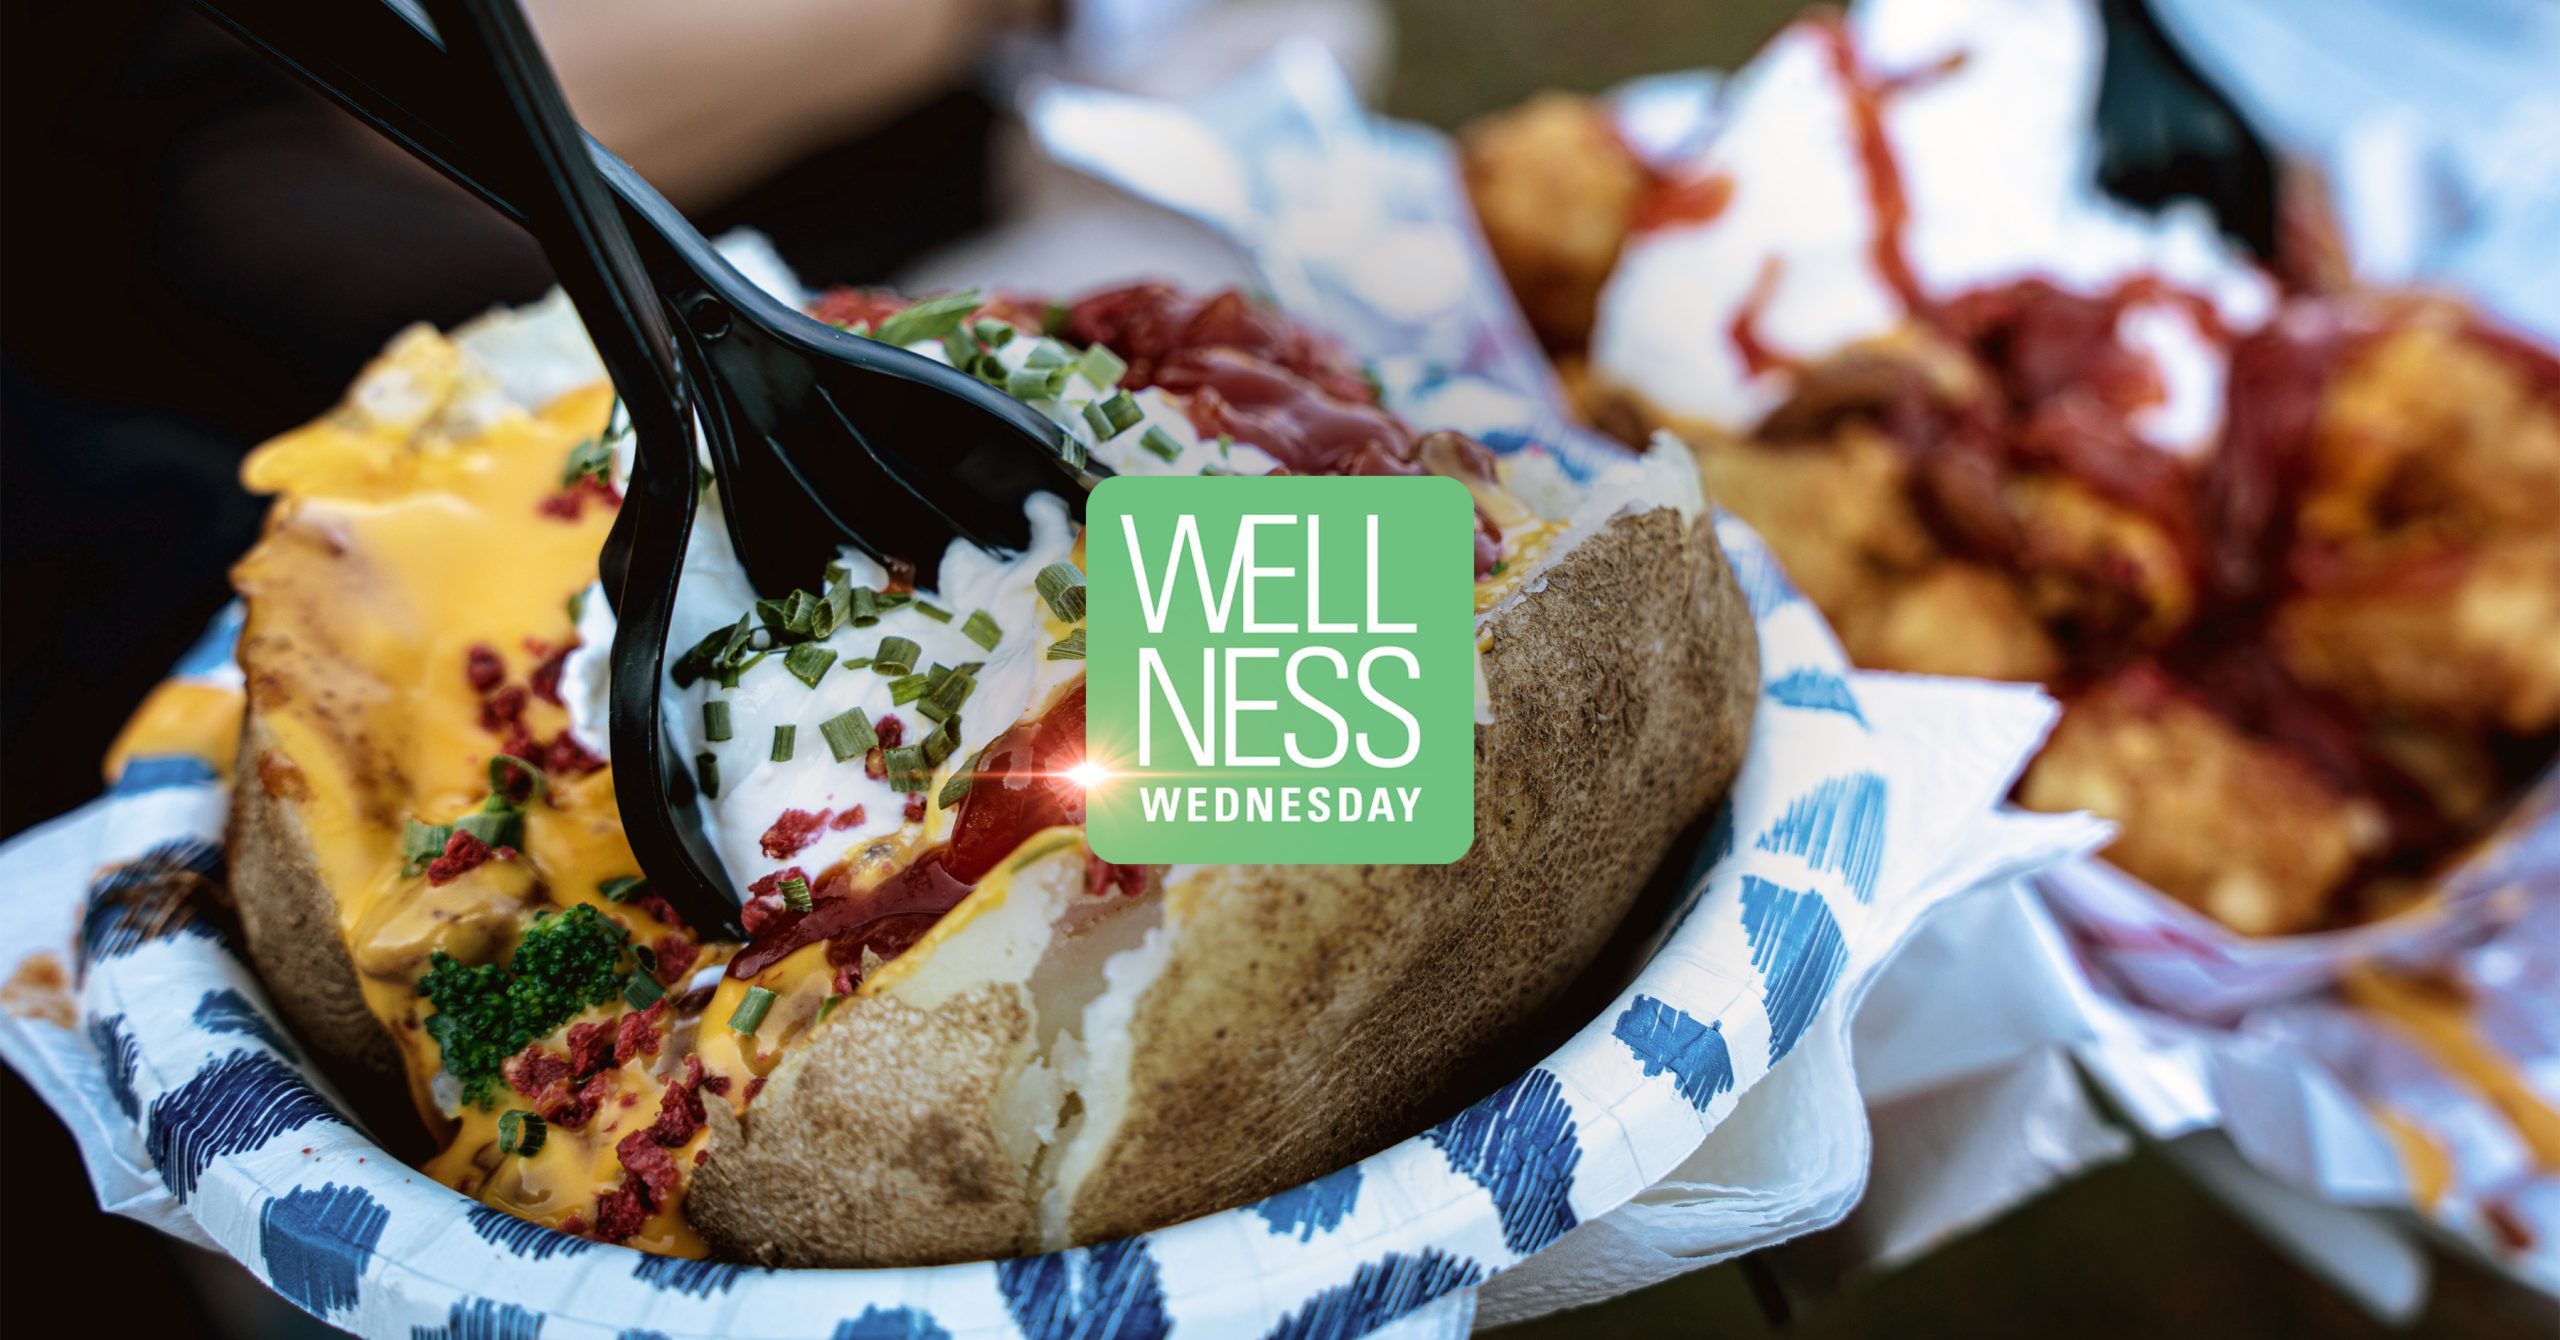 Wellness Wednesday: Five NEW Foods to Switch Up your Menu